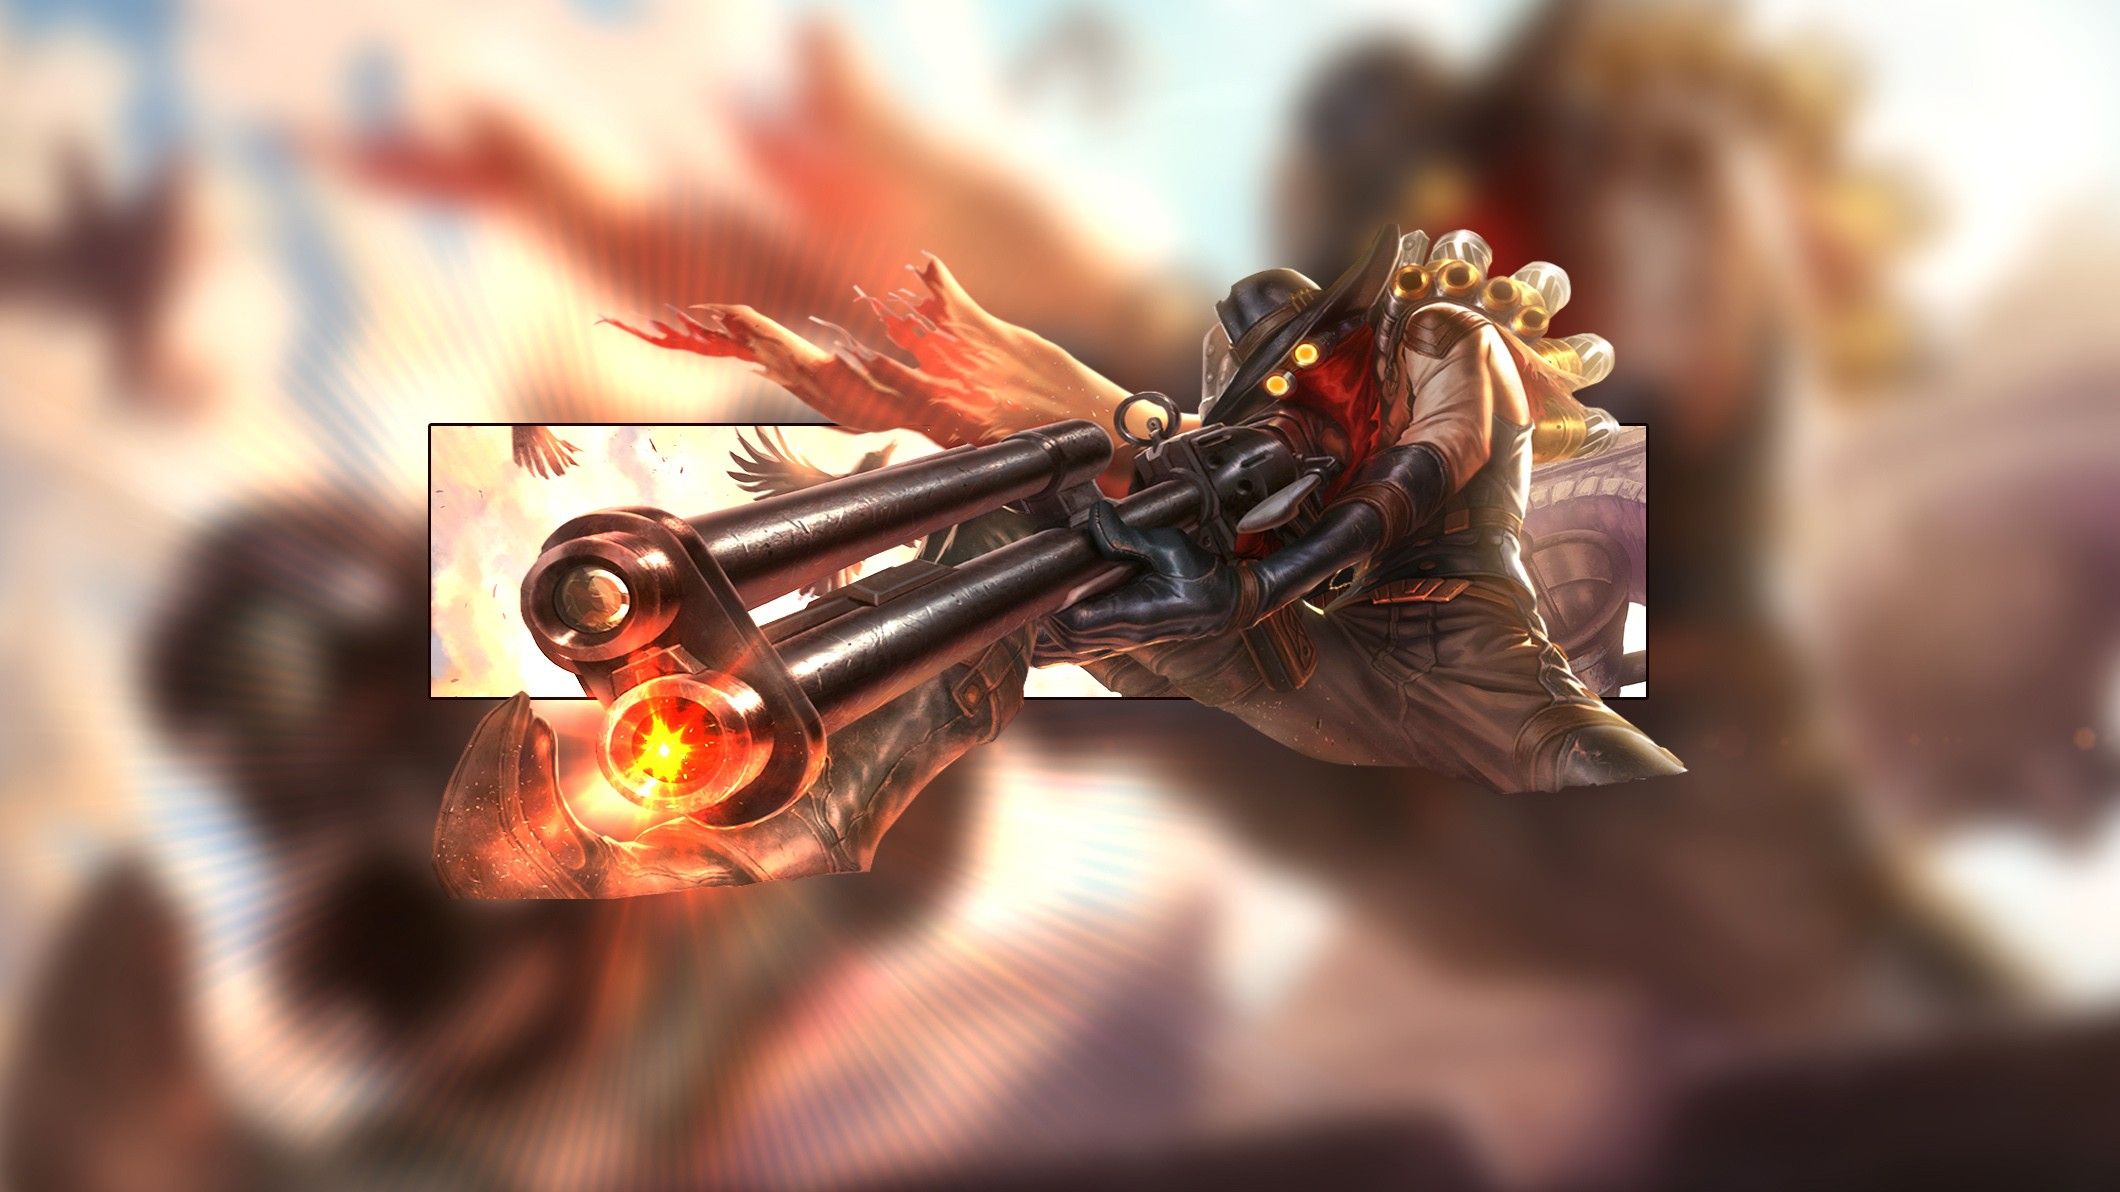 High Noon Jhin Wallpapers